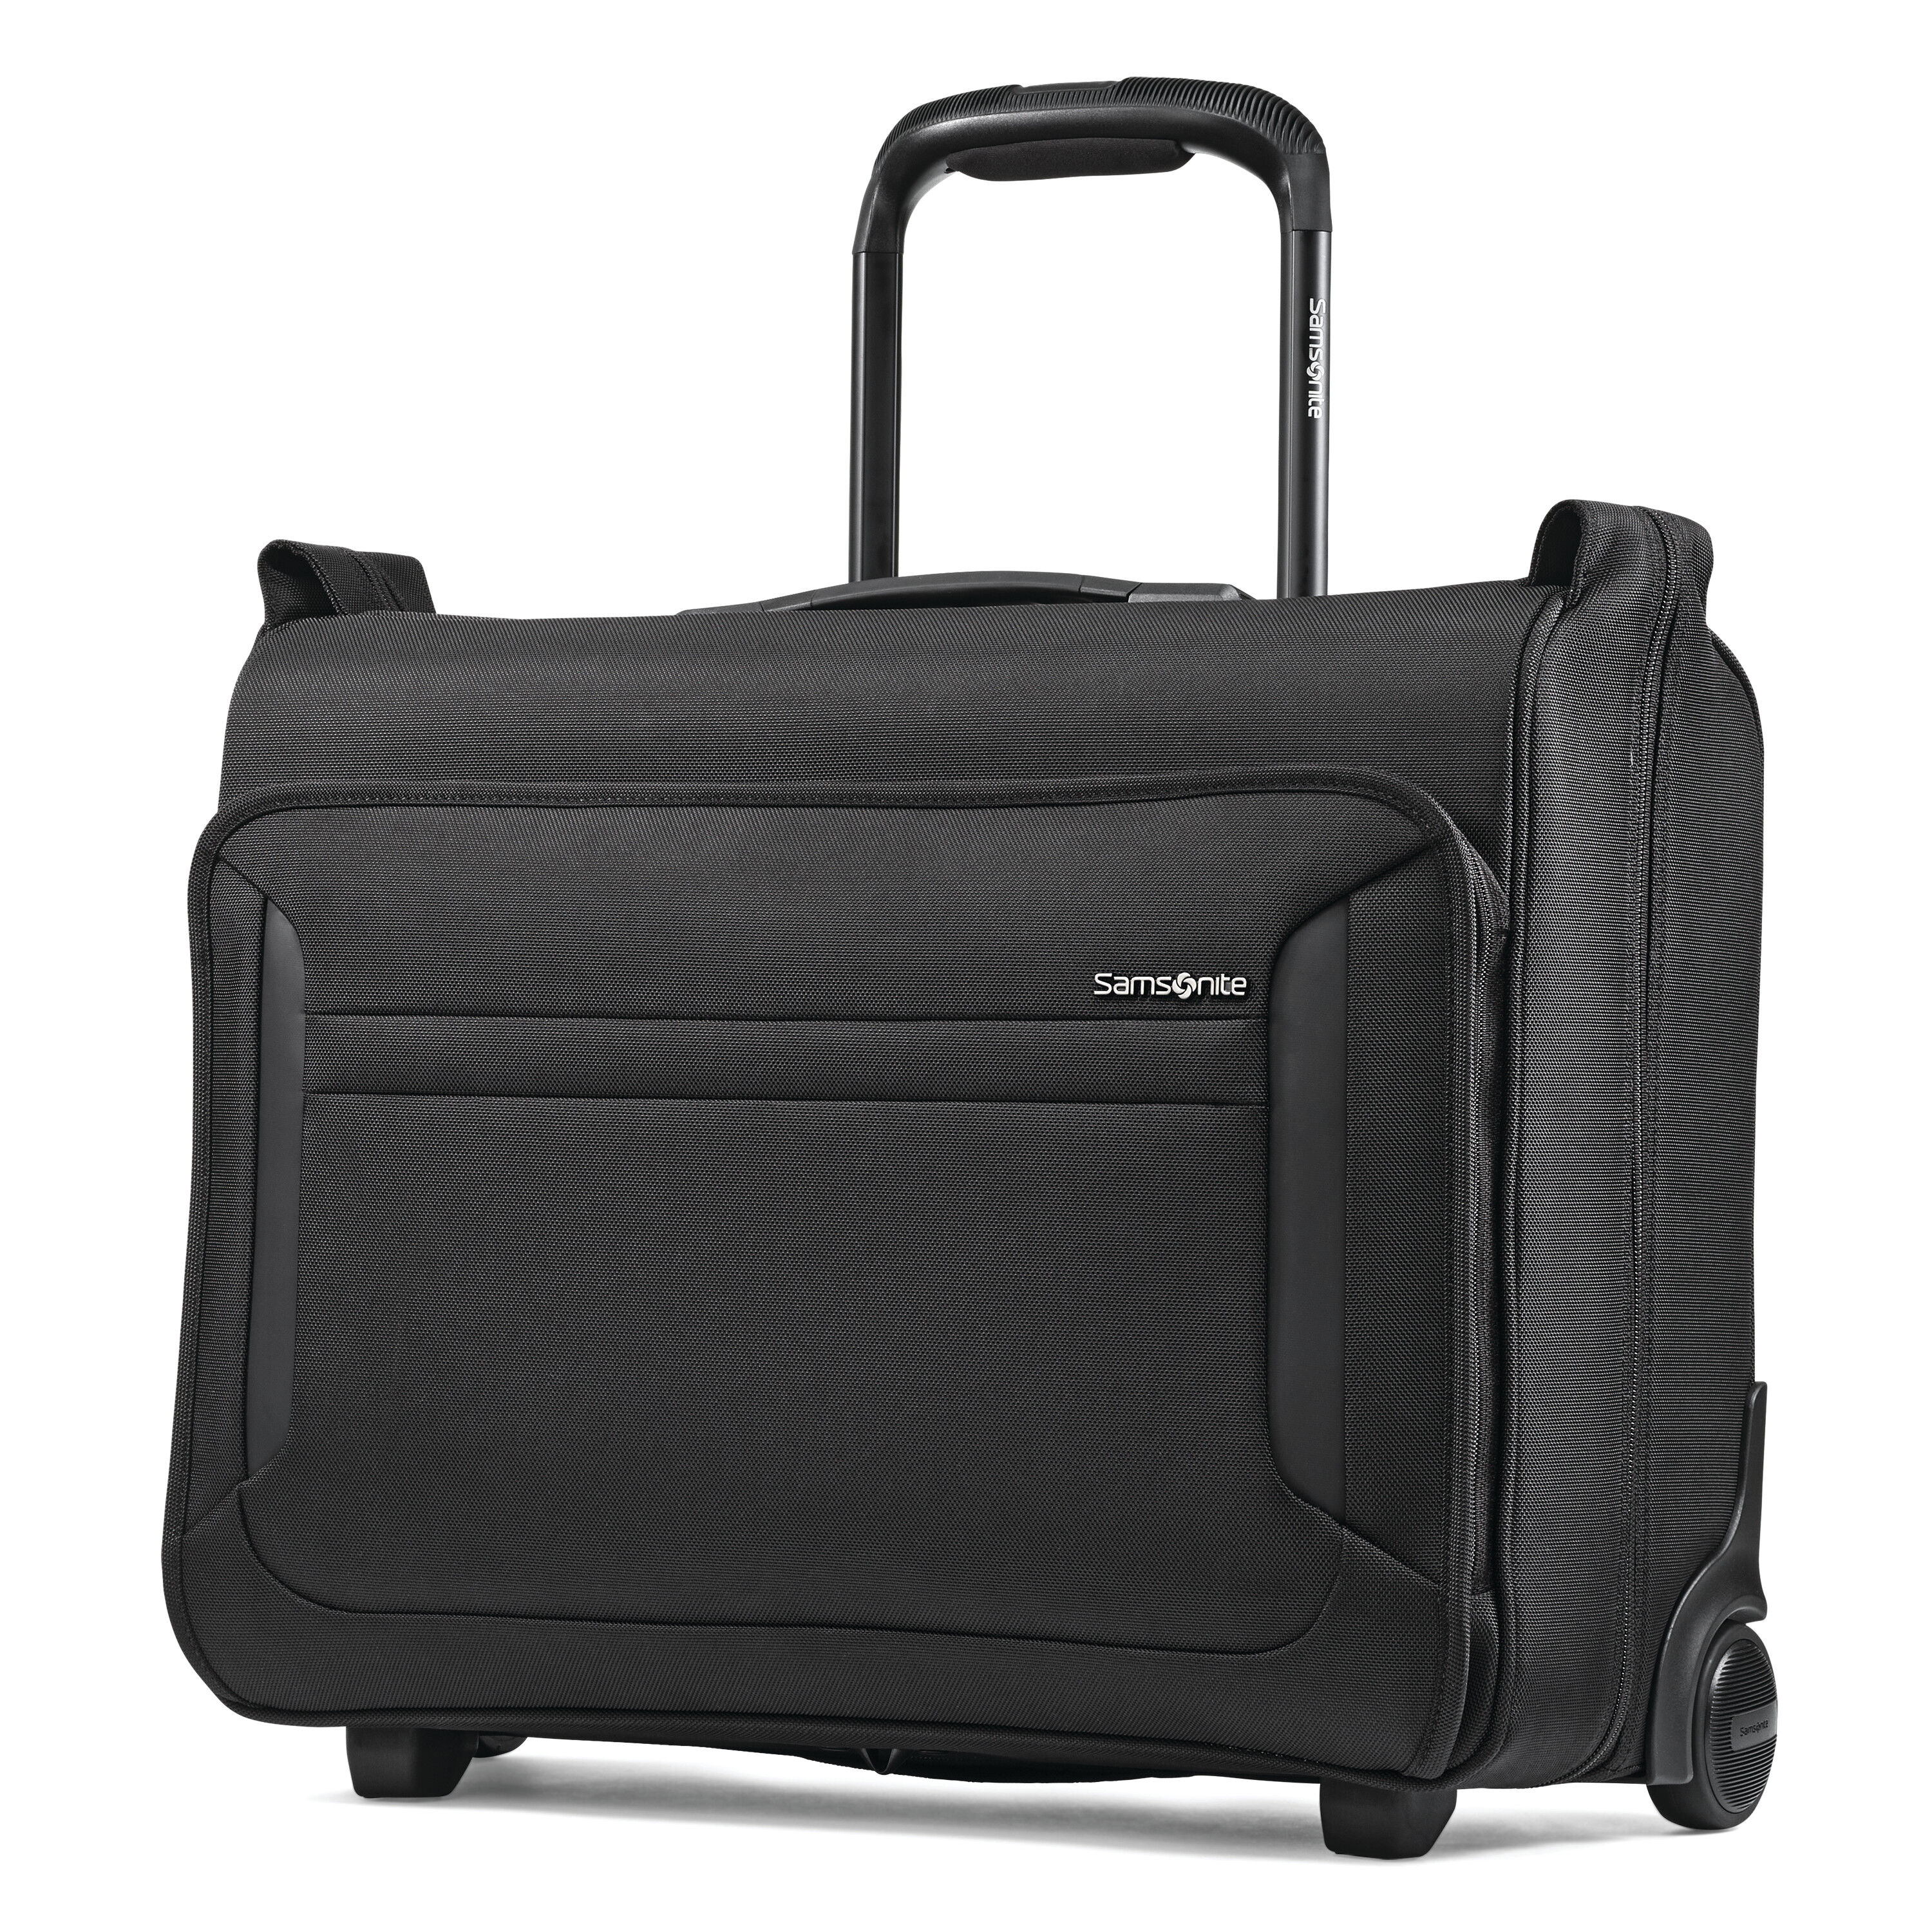 Best Garment Bags in 2022 - Check in & Carry on Garment Bags